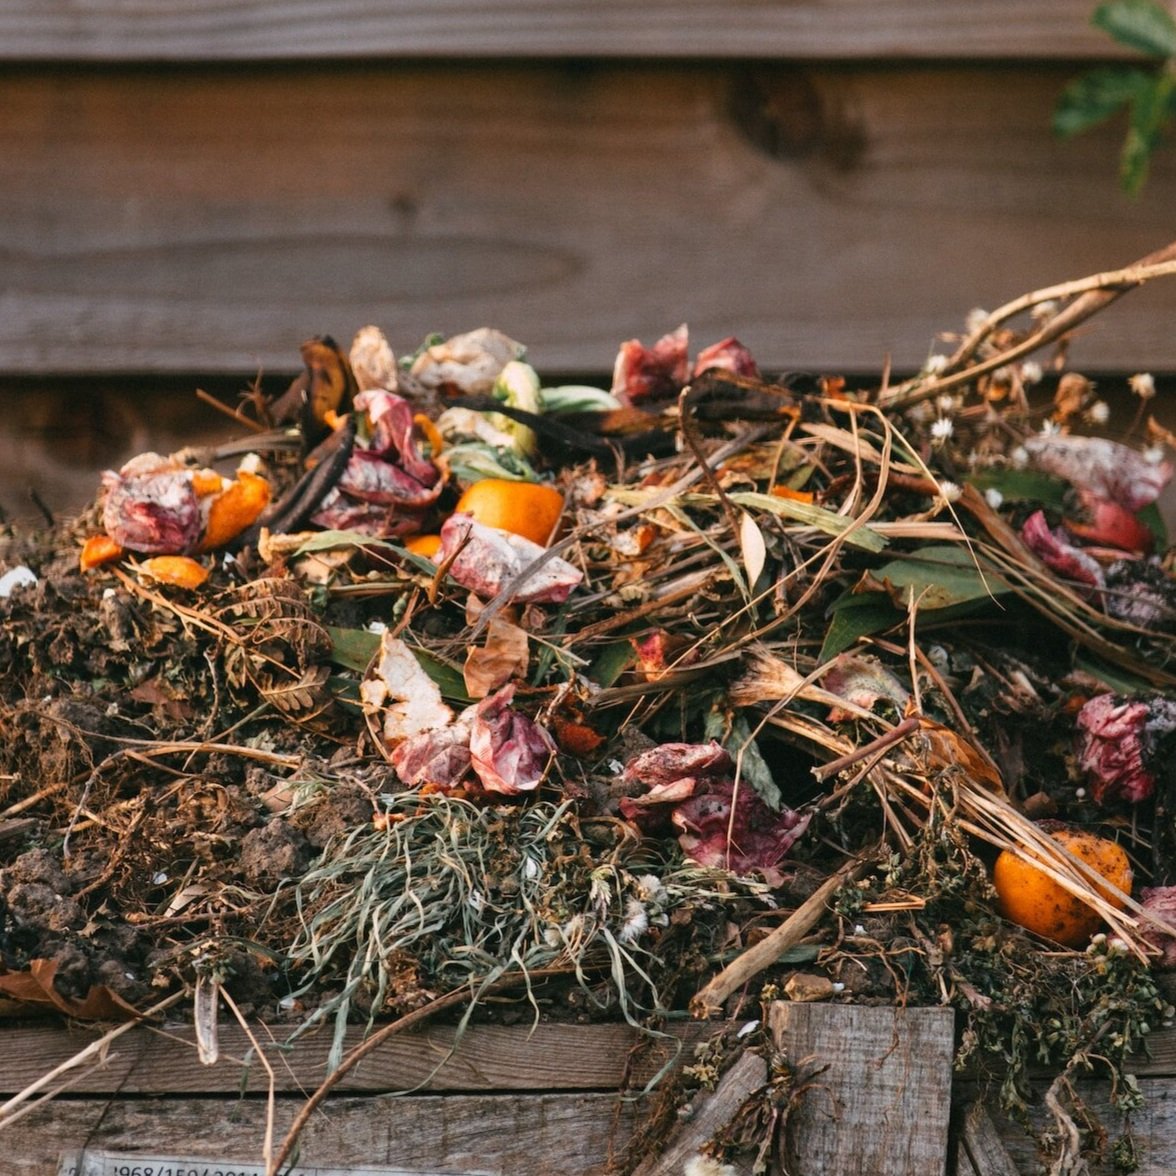 Composting Impacts More than you Think!